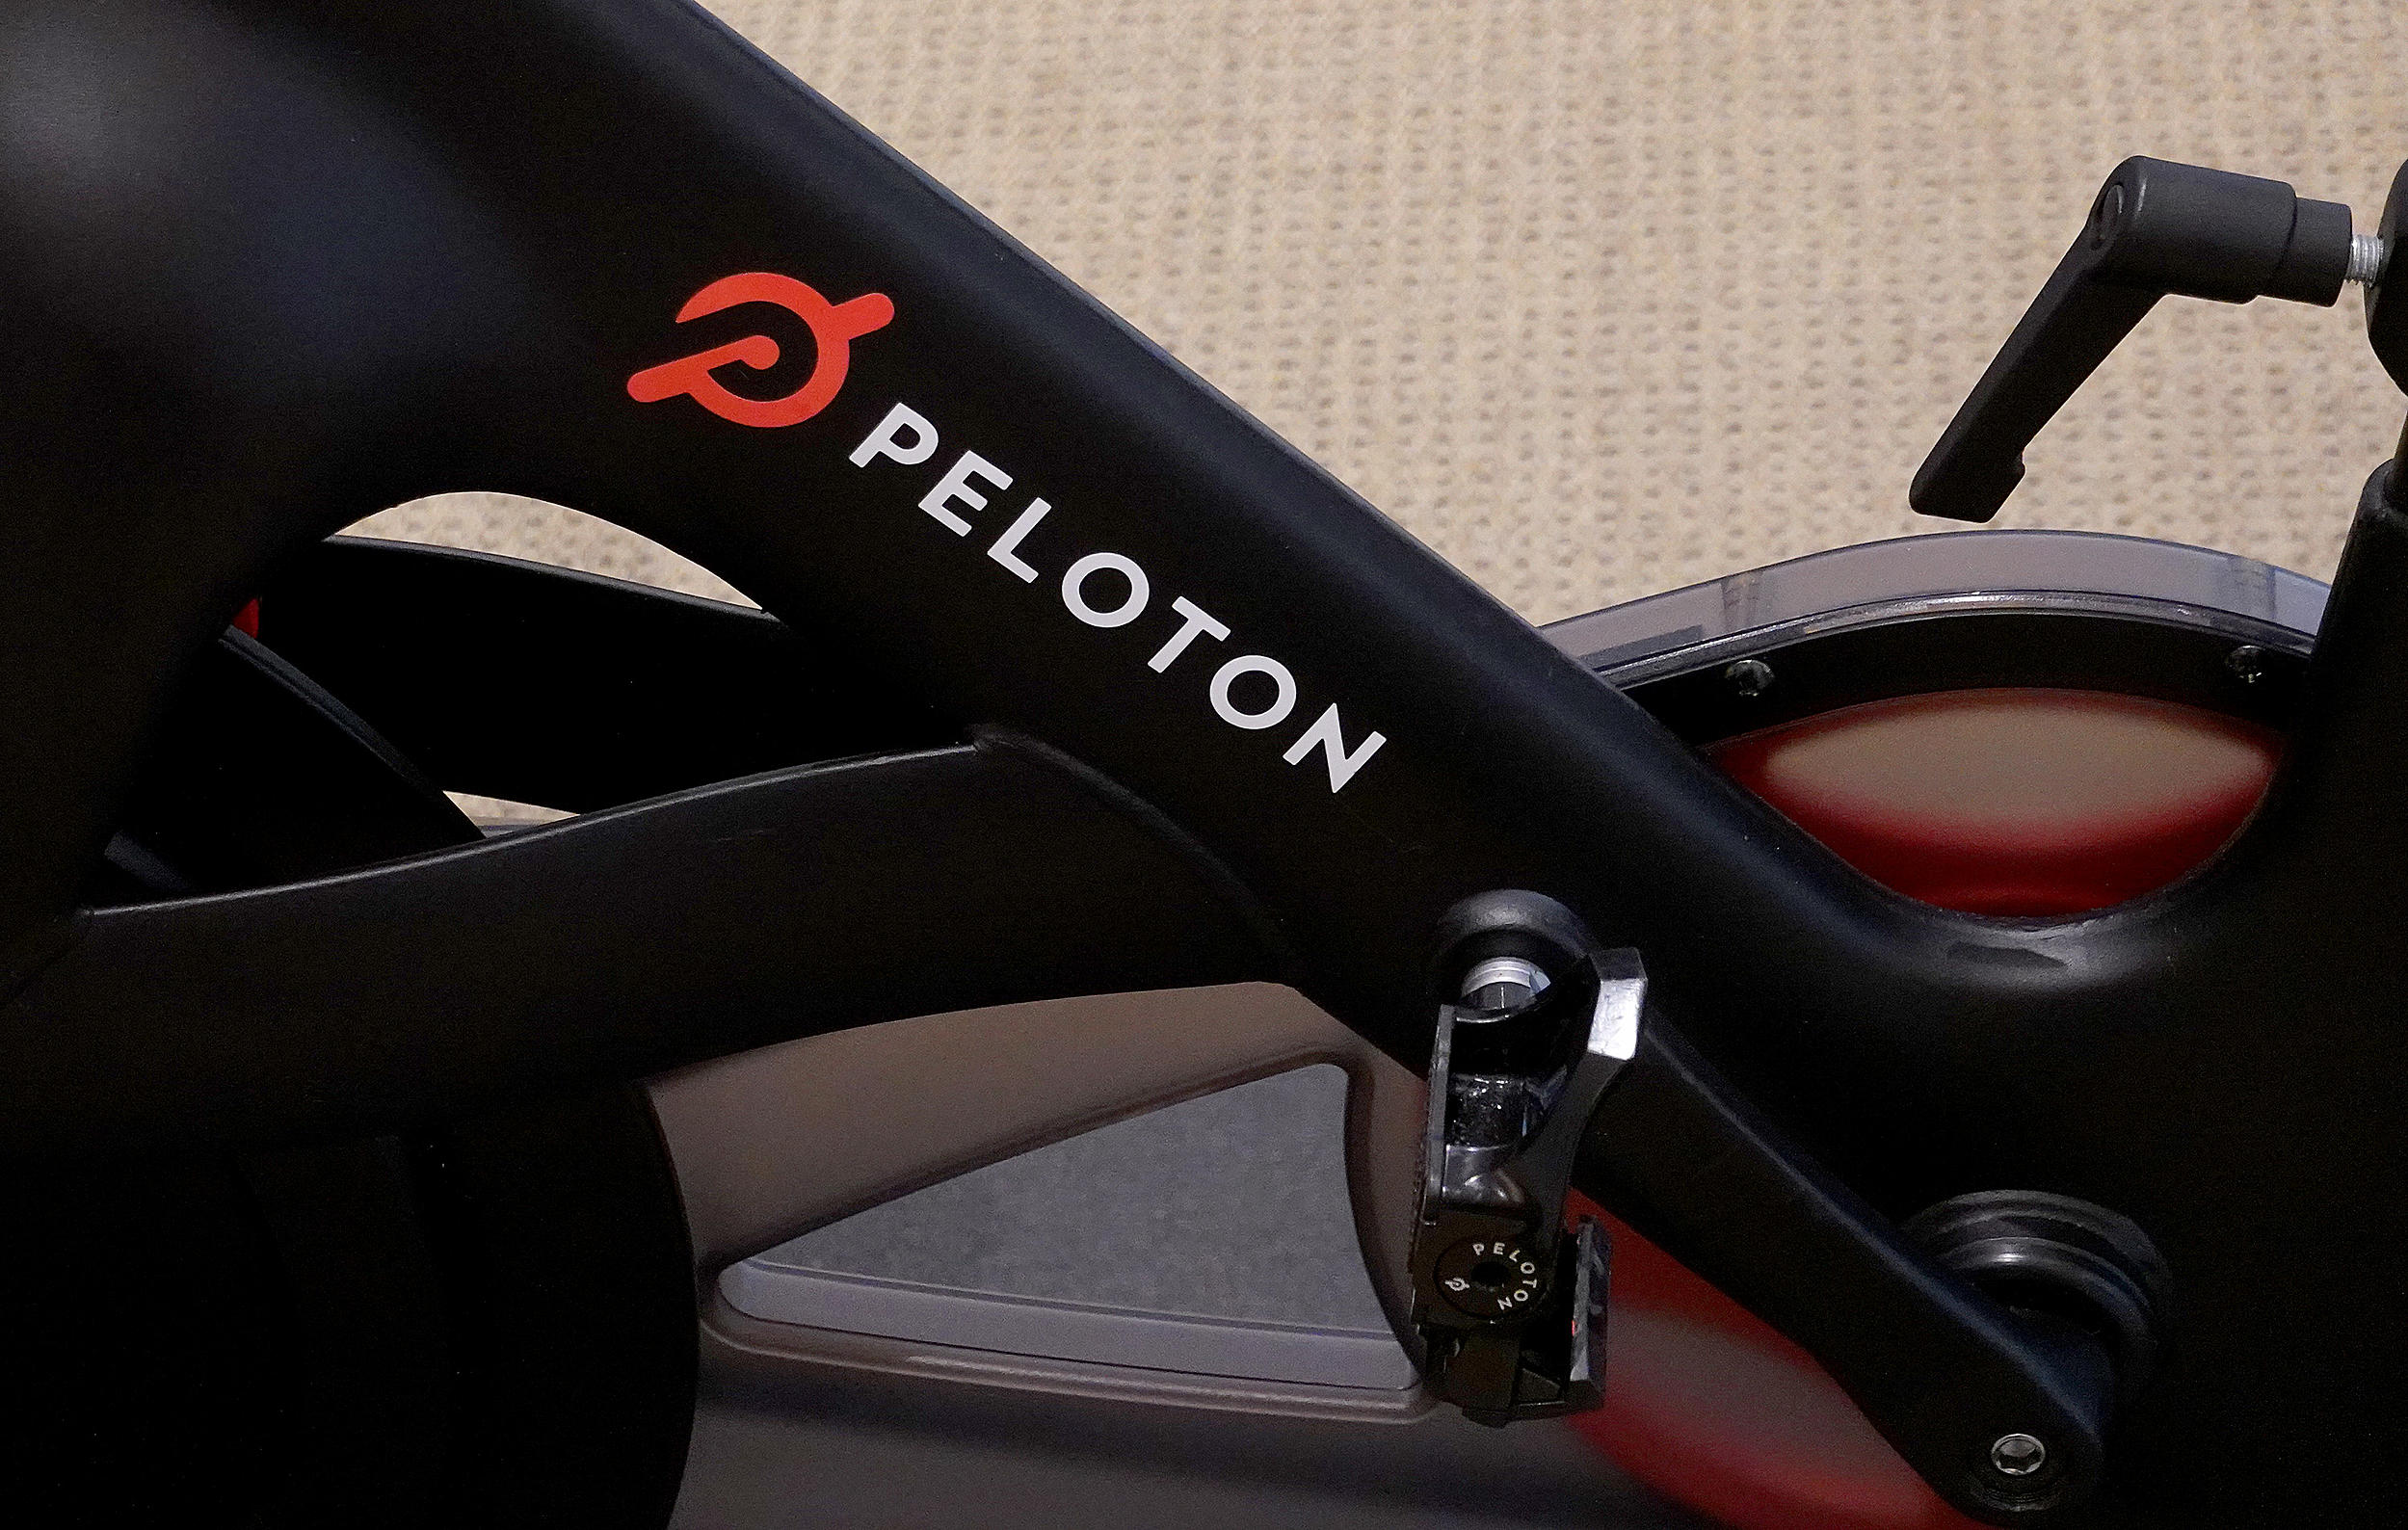 Forget Peloton. All you need to get pedaling is this $140 under-desk bike.